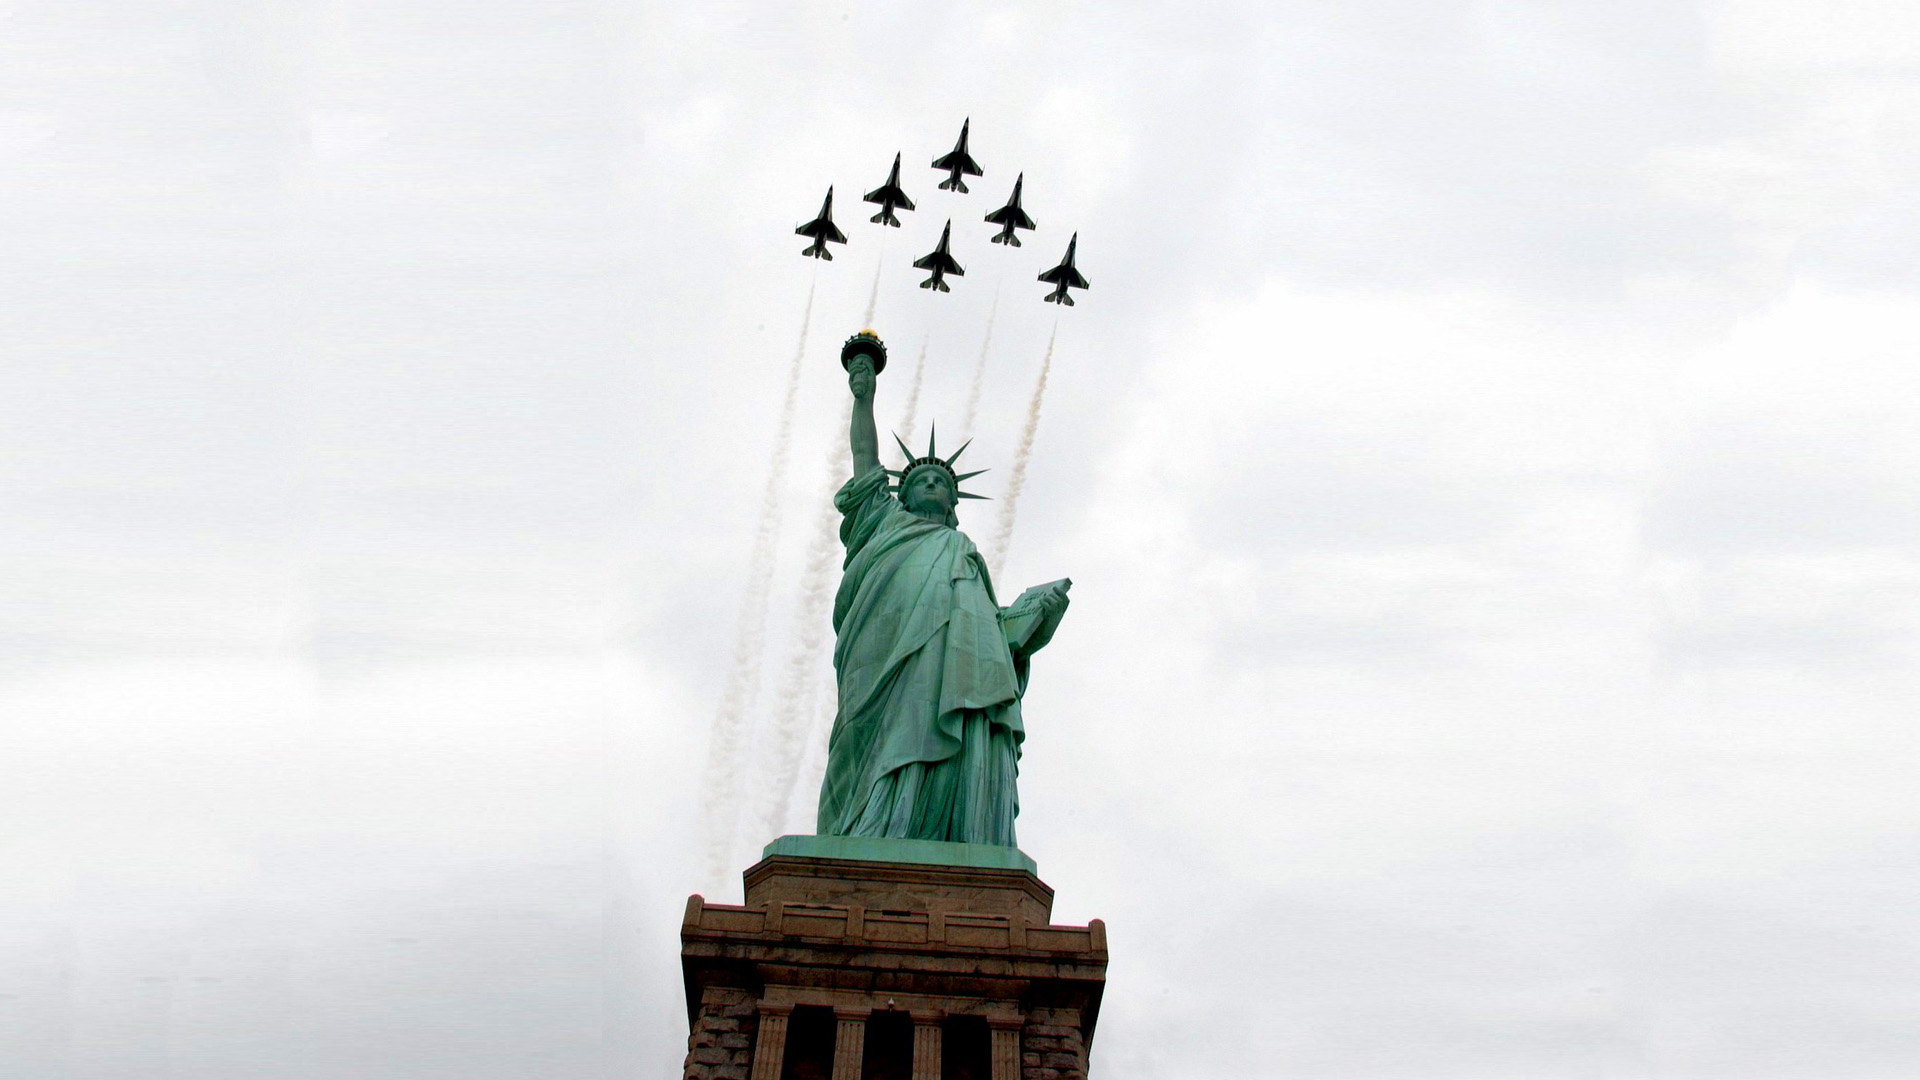 Statue Of Liberty Wallpapers Pictures Images Afalchi Free images wallpape [afalchi.blogspot.com]